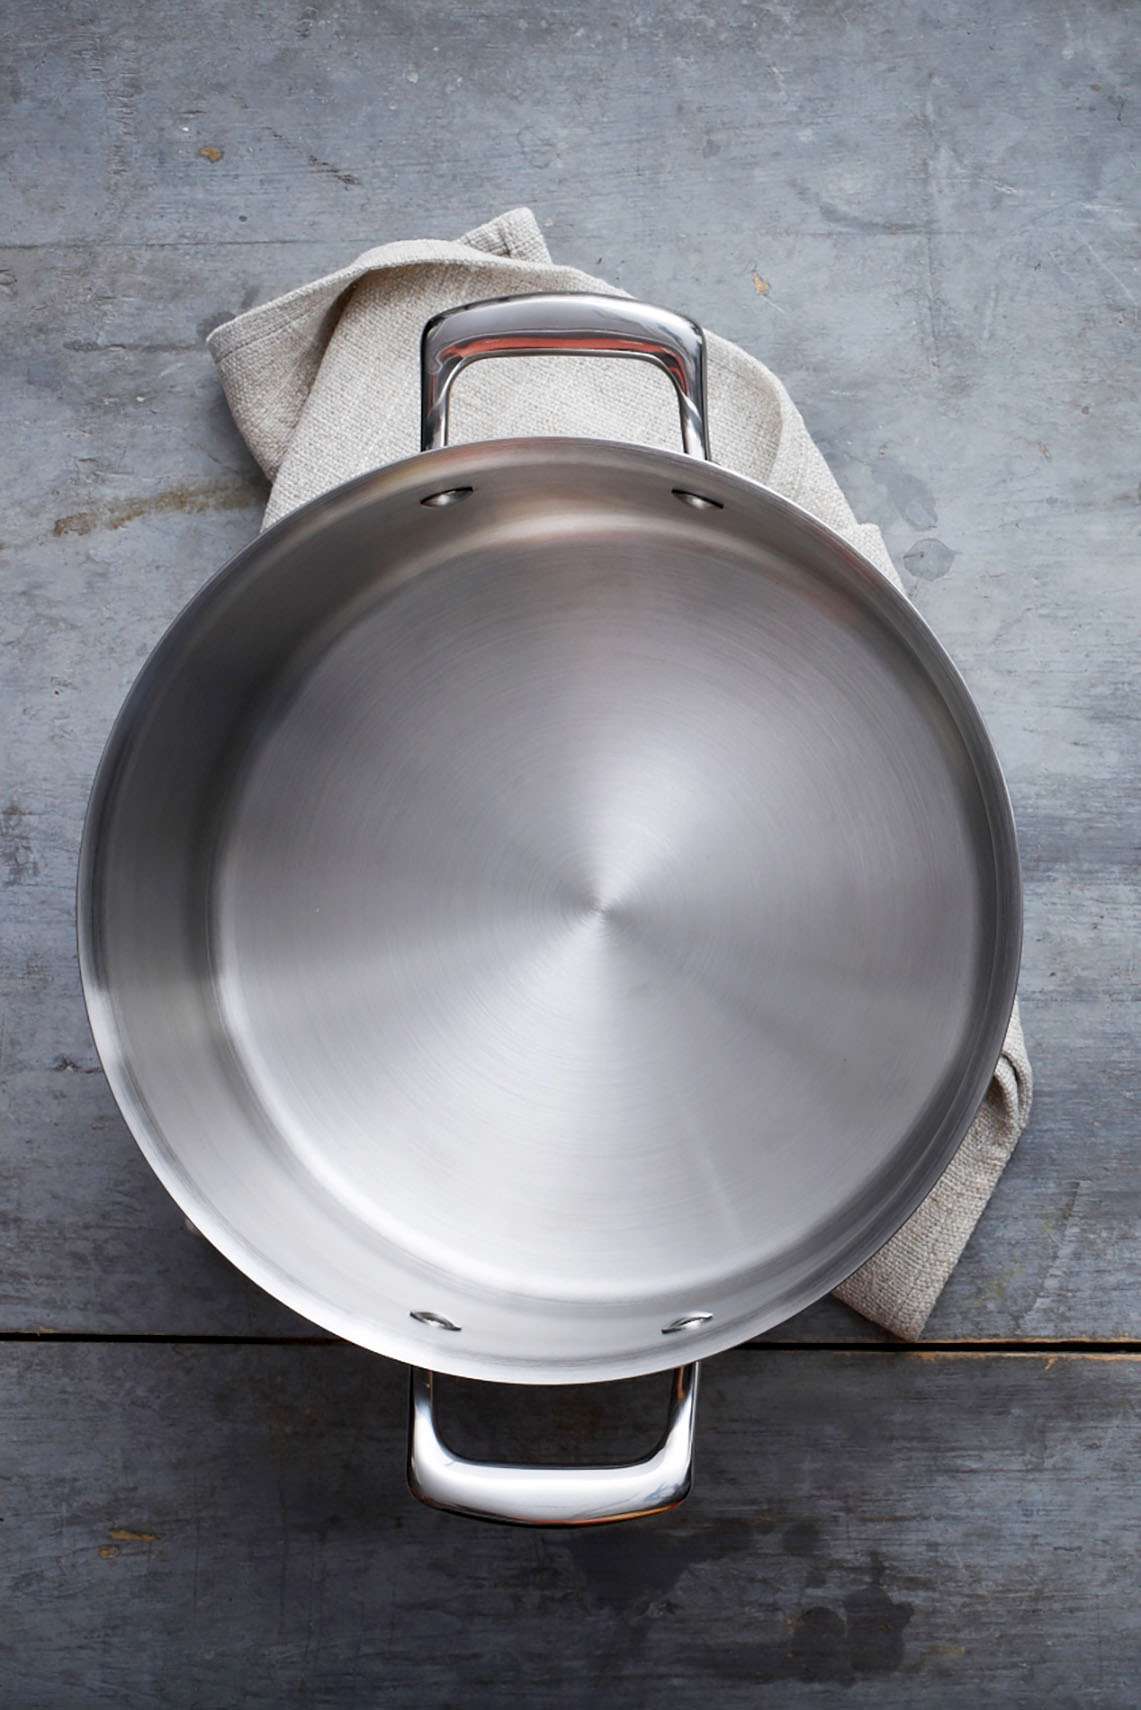 pressure cooker on a gray countertop